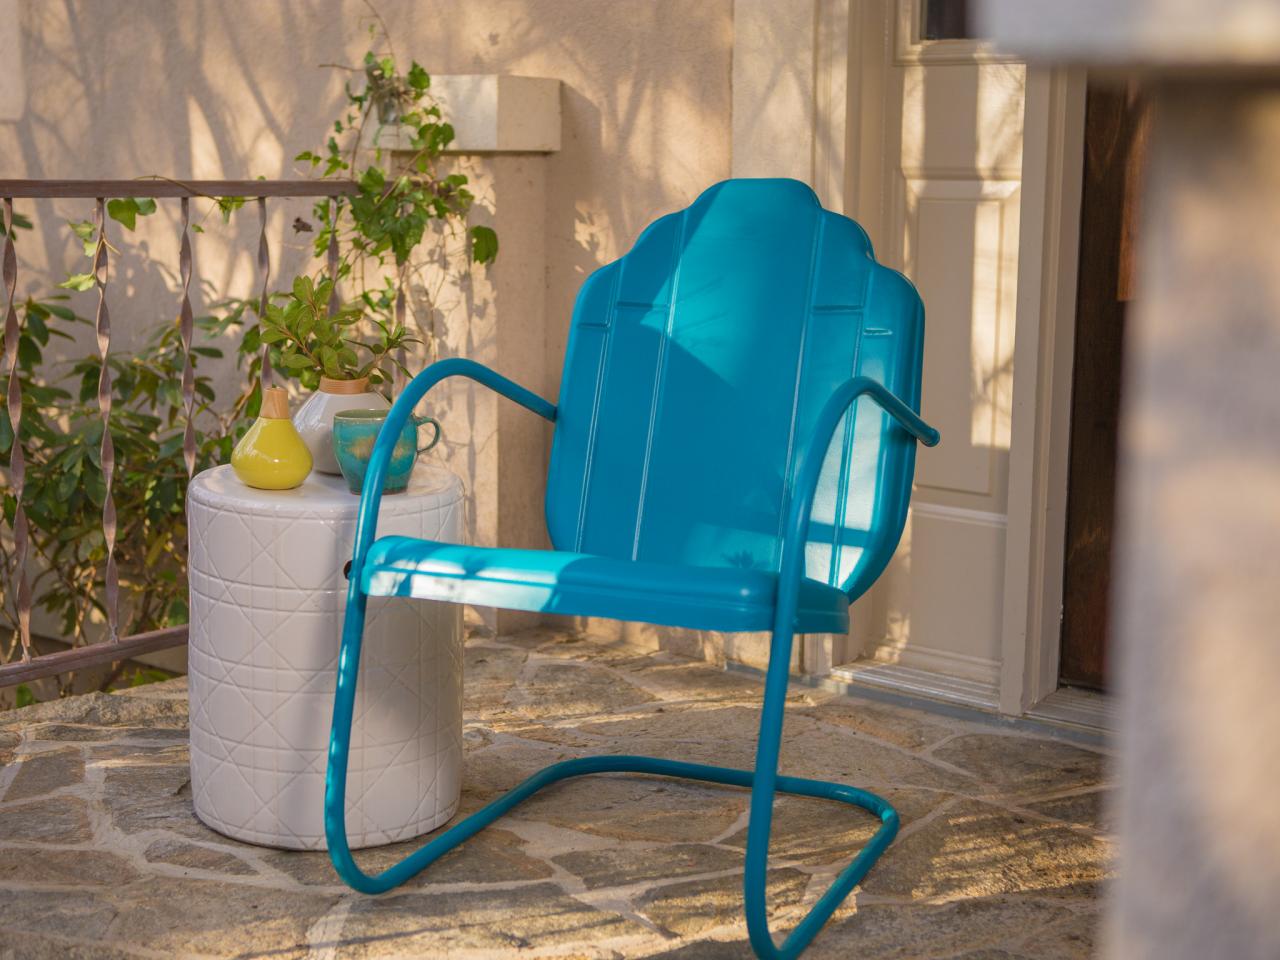 How To Paint An Outdoor Metal Chair, What Paint To Use For Metal Garden Furniture